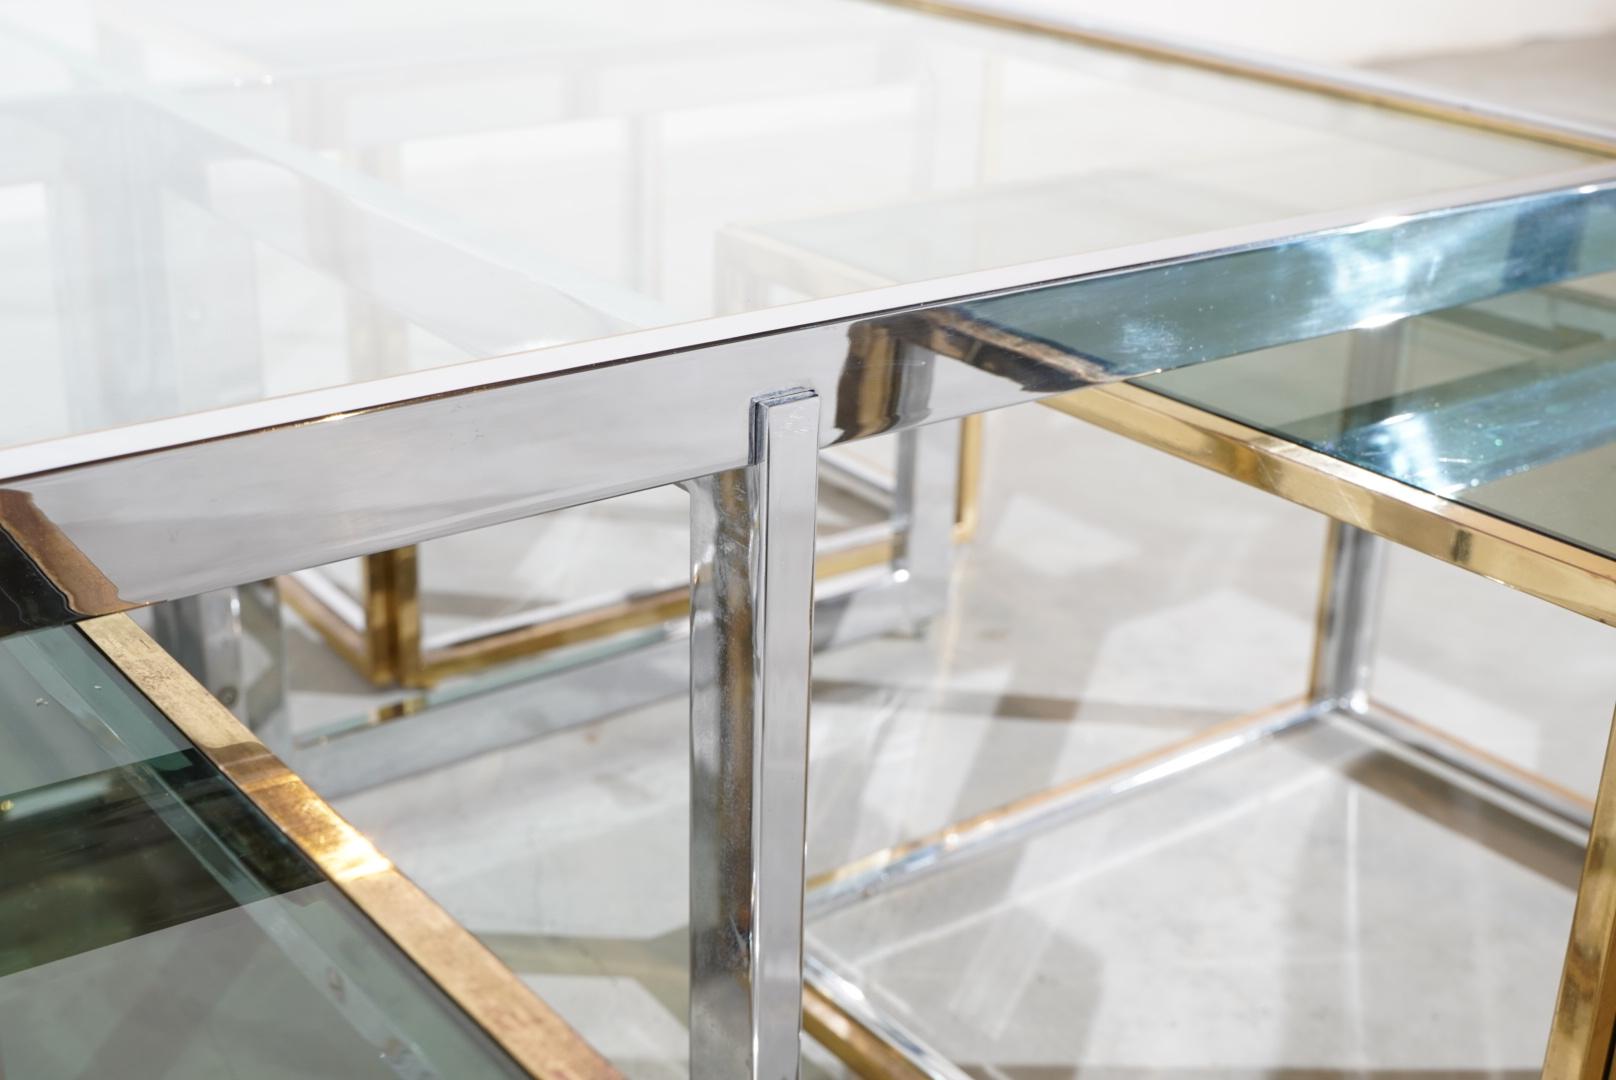 Extremely rare Romeo Rega coffee table with 4 side tables in brassed and chromed steel. 

Very handy, because you can simply slide the four side tables under your table.
